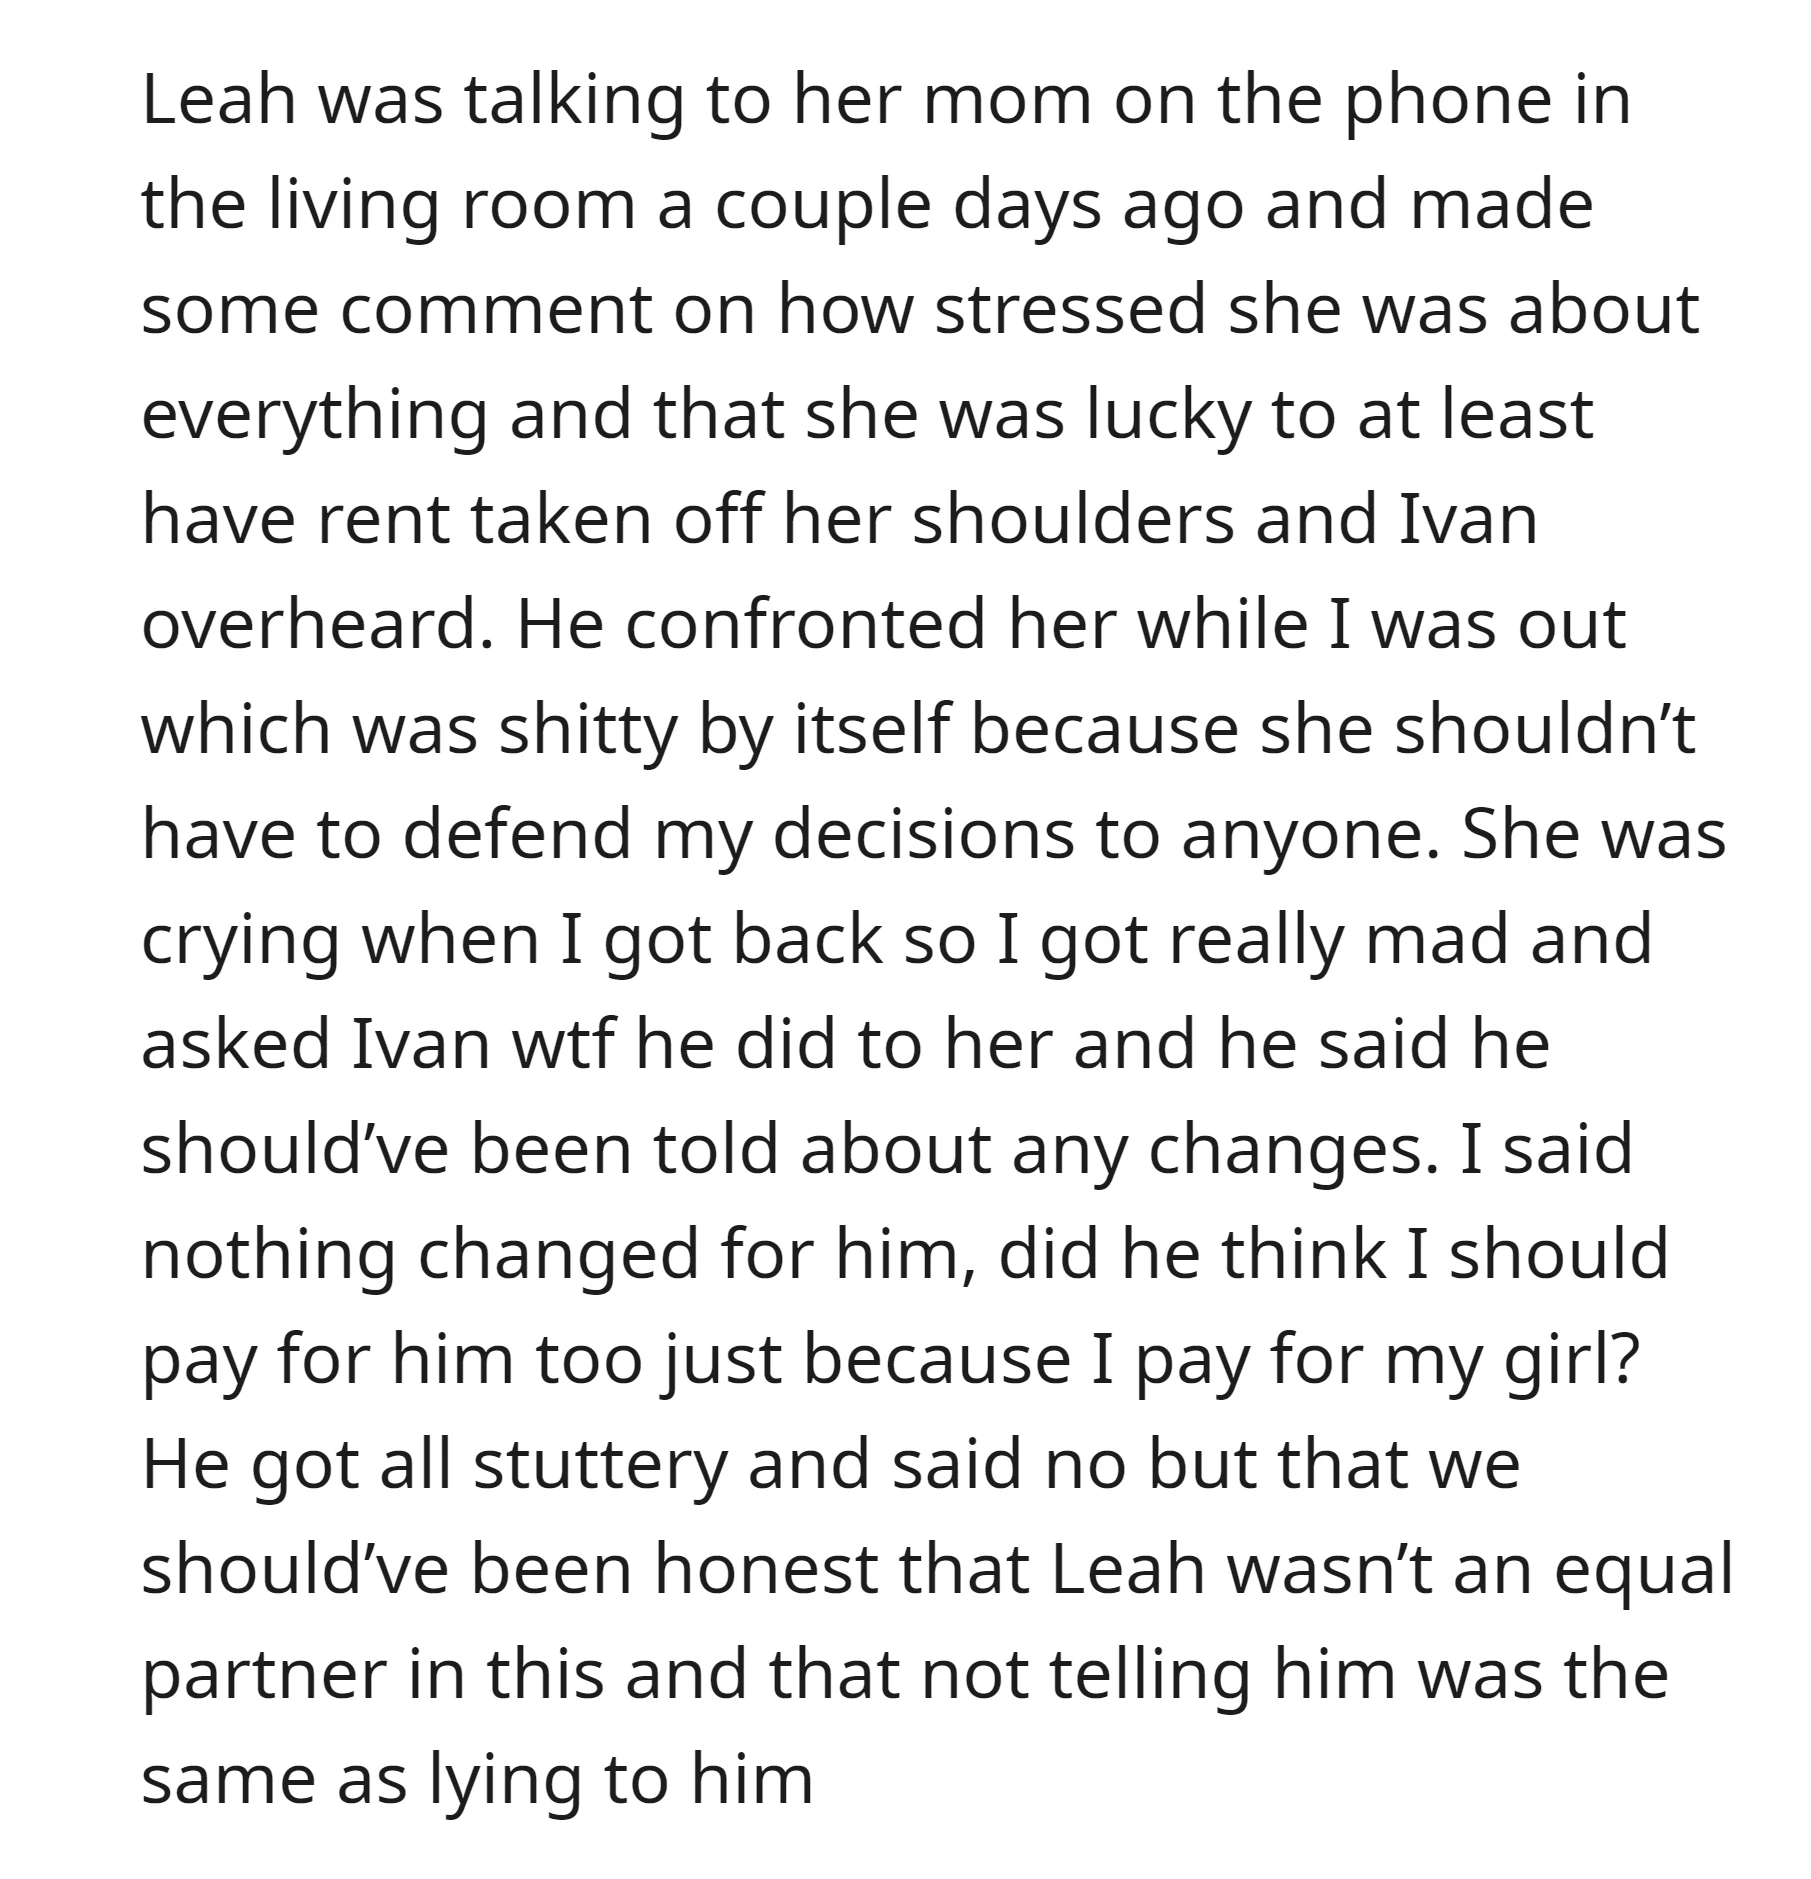 Leah unintentionally revealed, and the roommate confronted her about the OP had been covering her rent